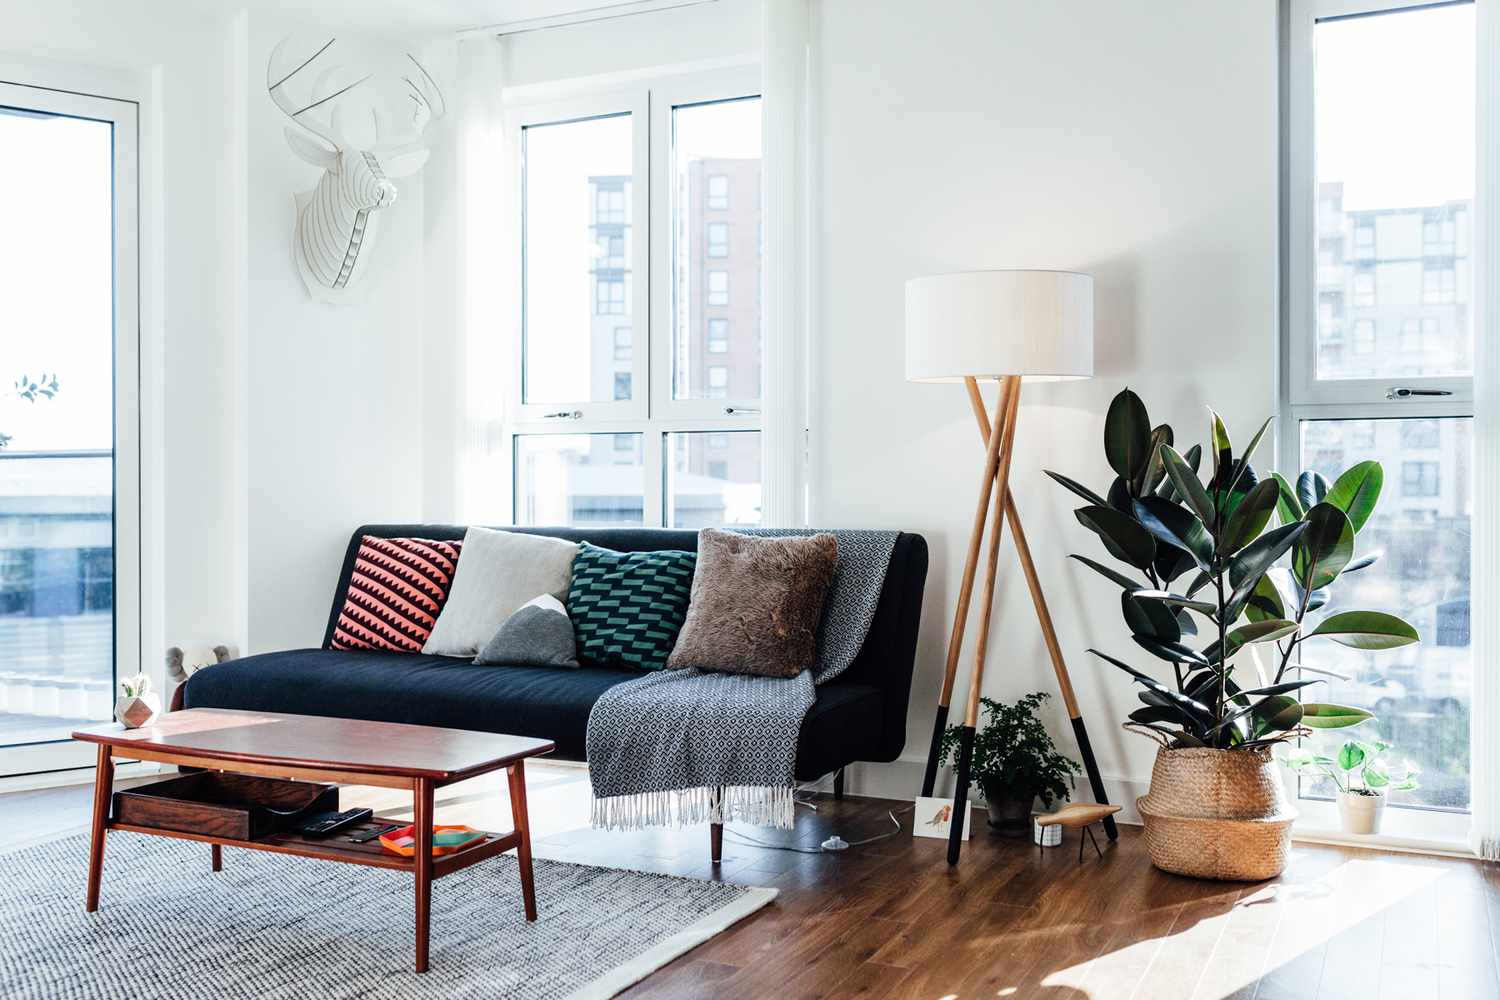 20 Clever Small Living Room Decorating Ideas   Real Simple